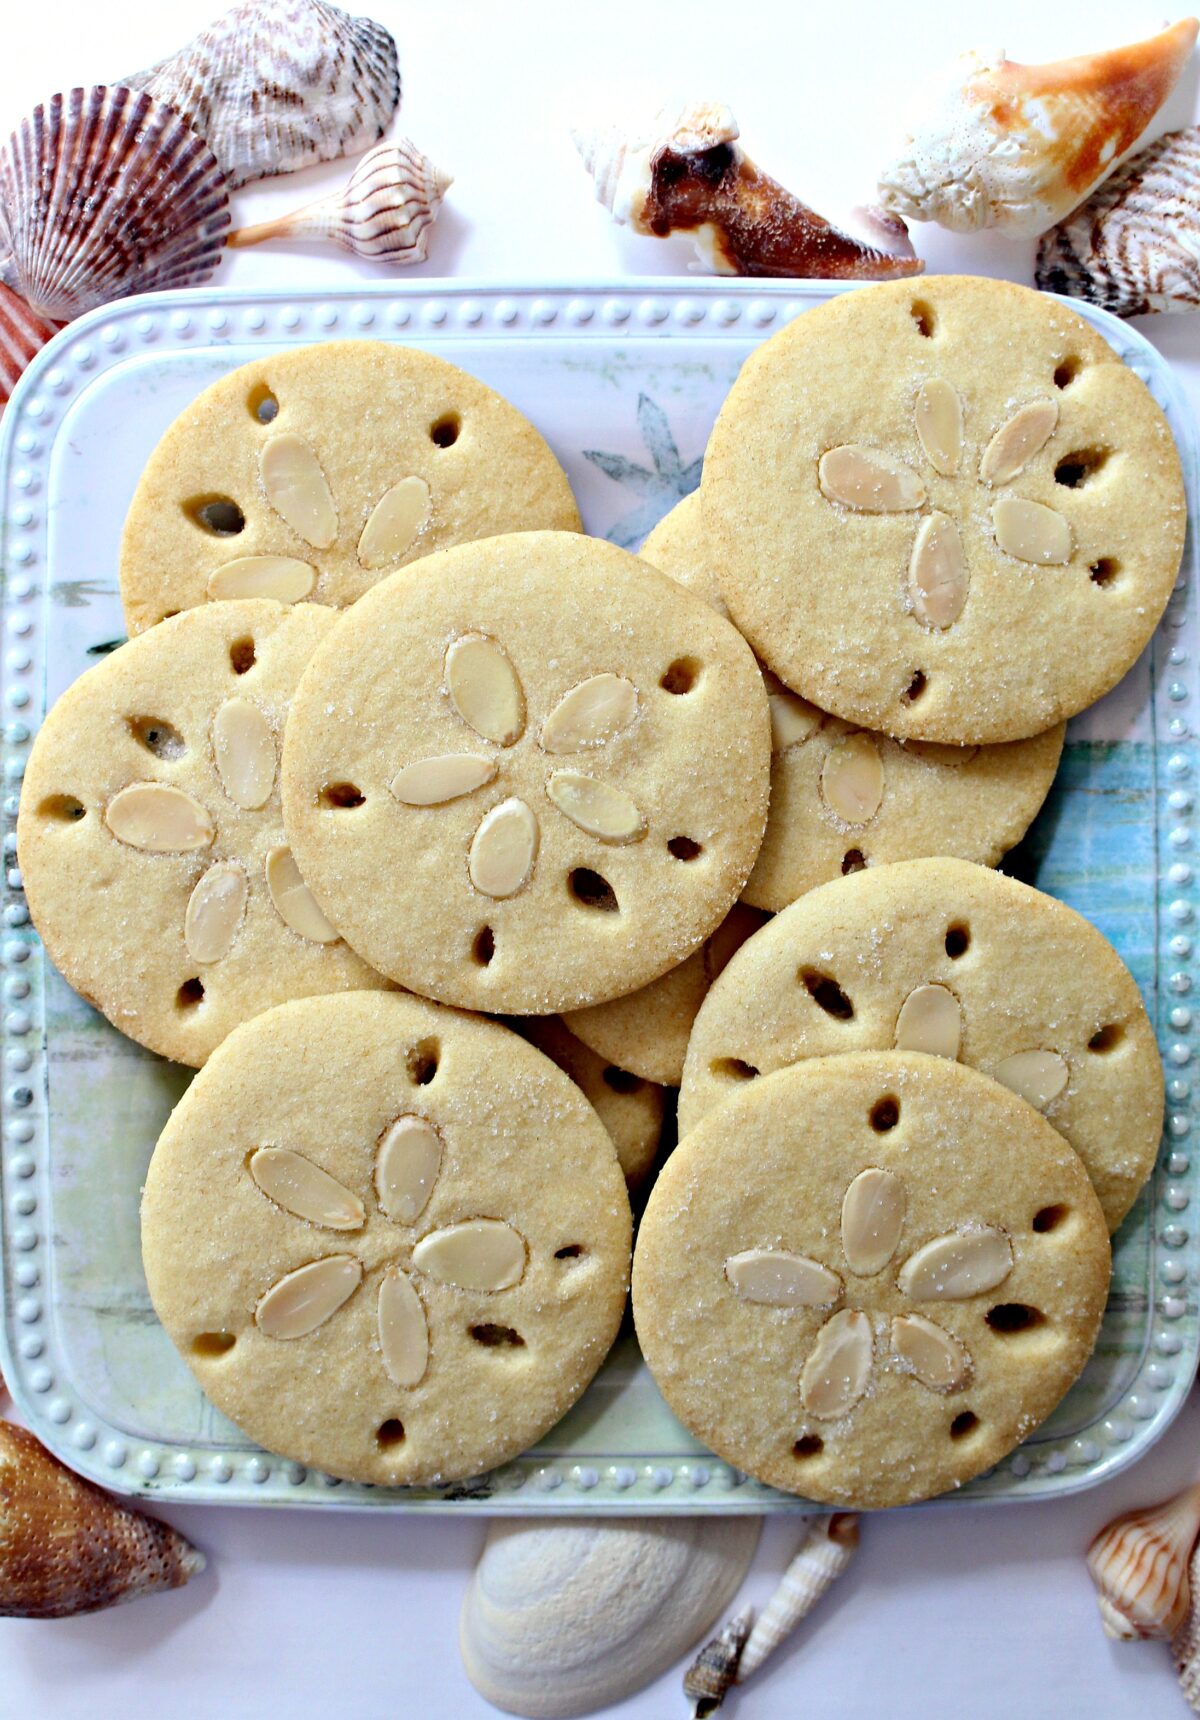 Sand Dollar Cookies that look like real sand dollars with almond slices in the centers.